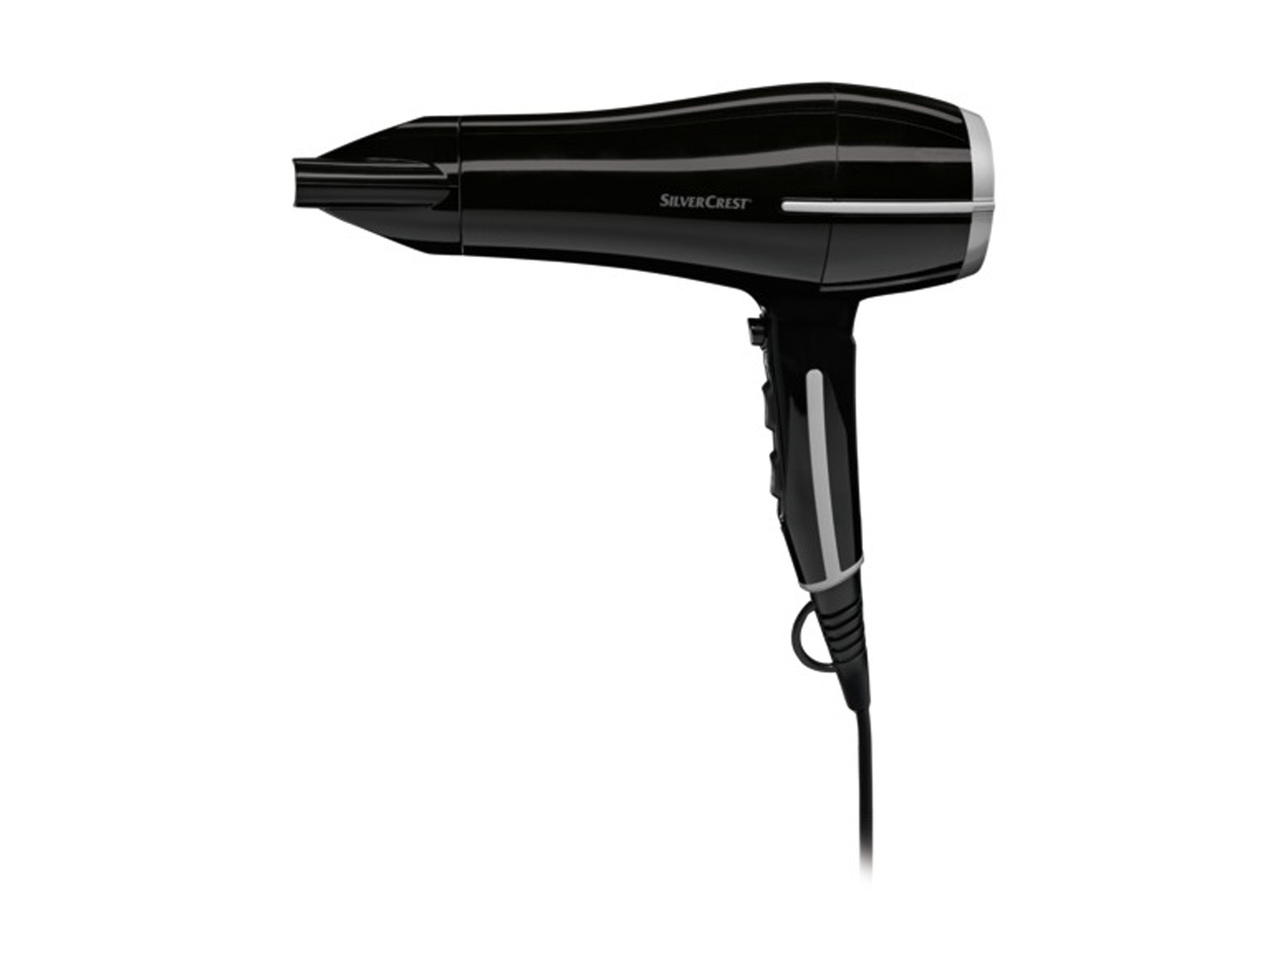 SILVERCREST PERSONAL CARE 2300W Ionic Hair Dryer with Touch Sensor